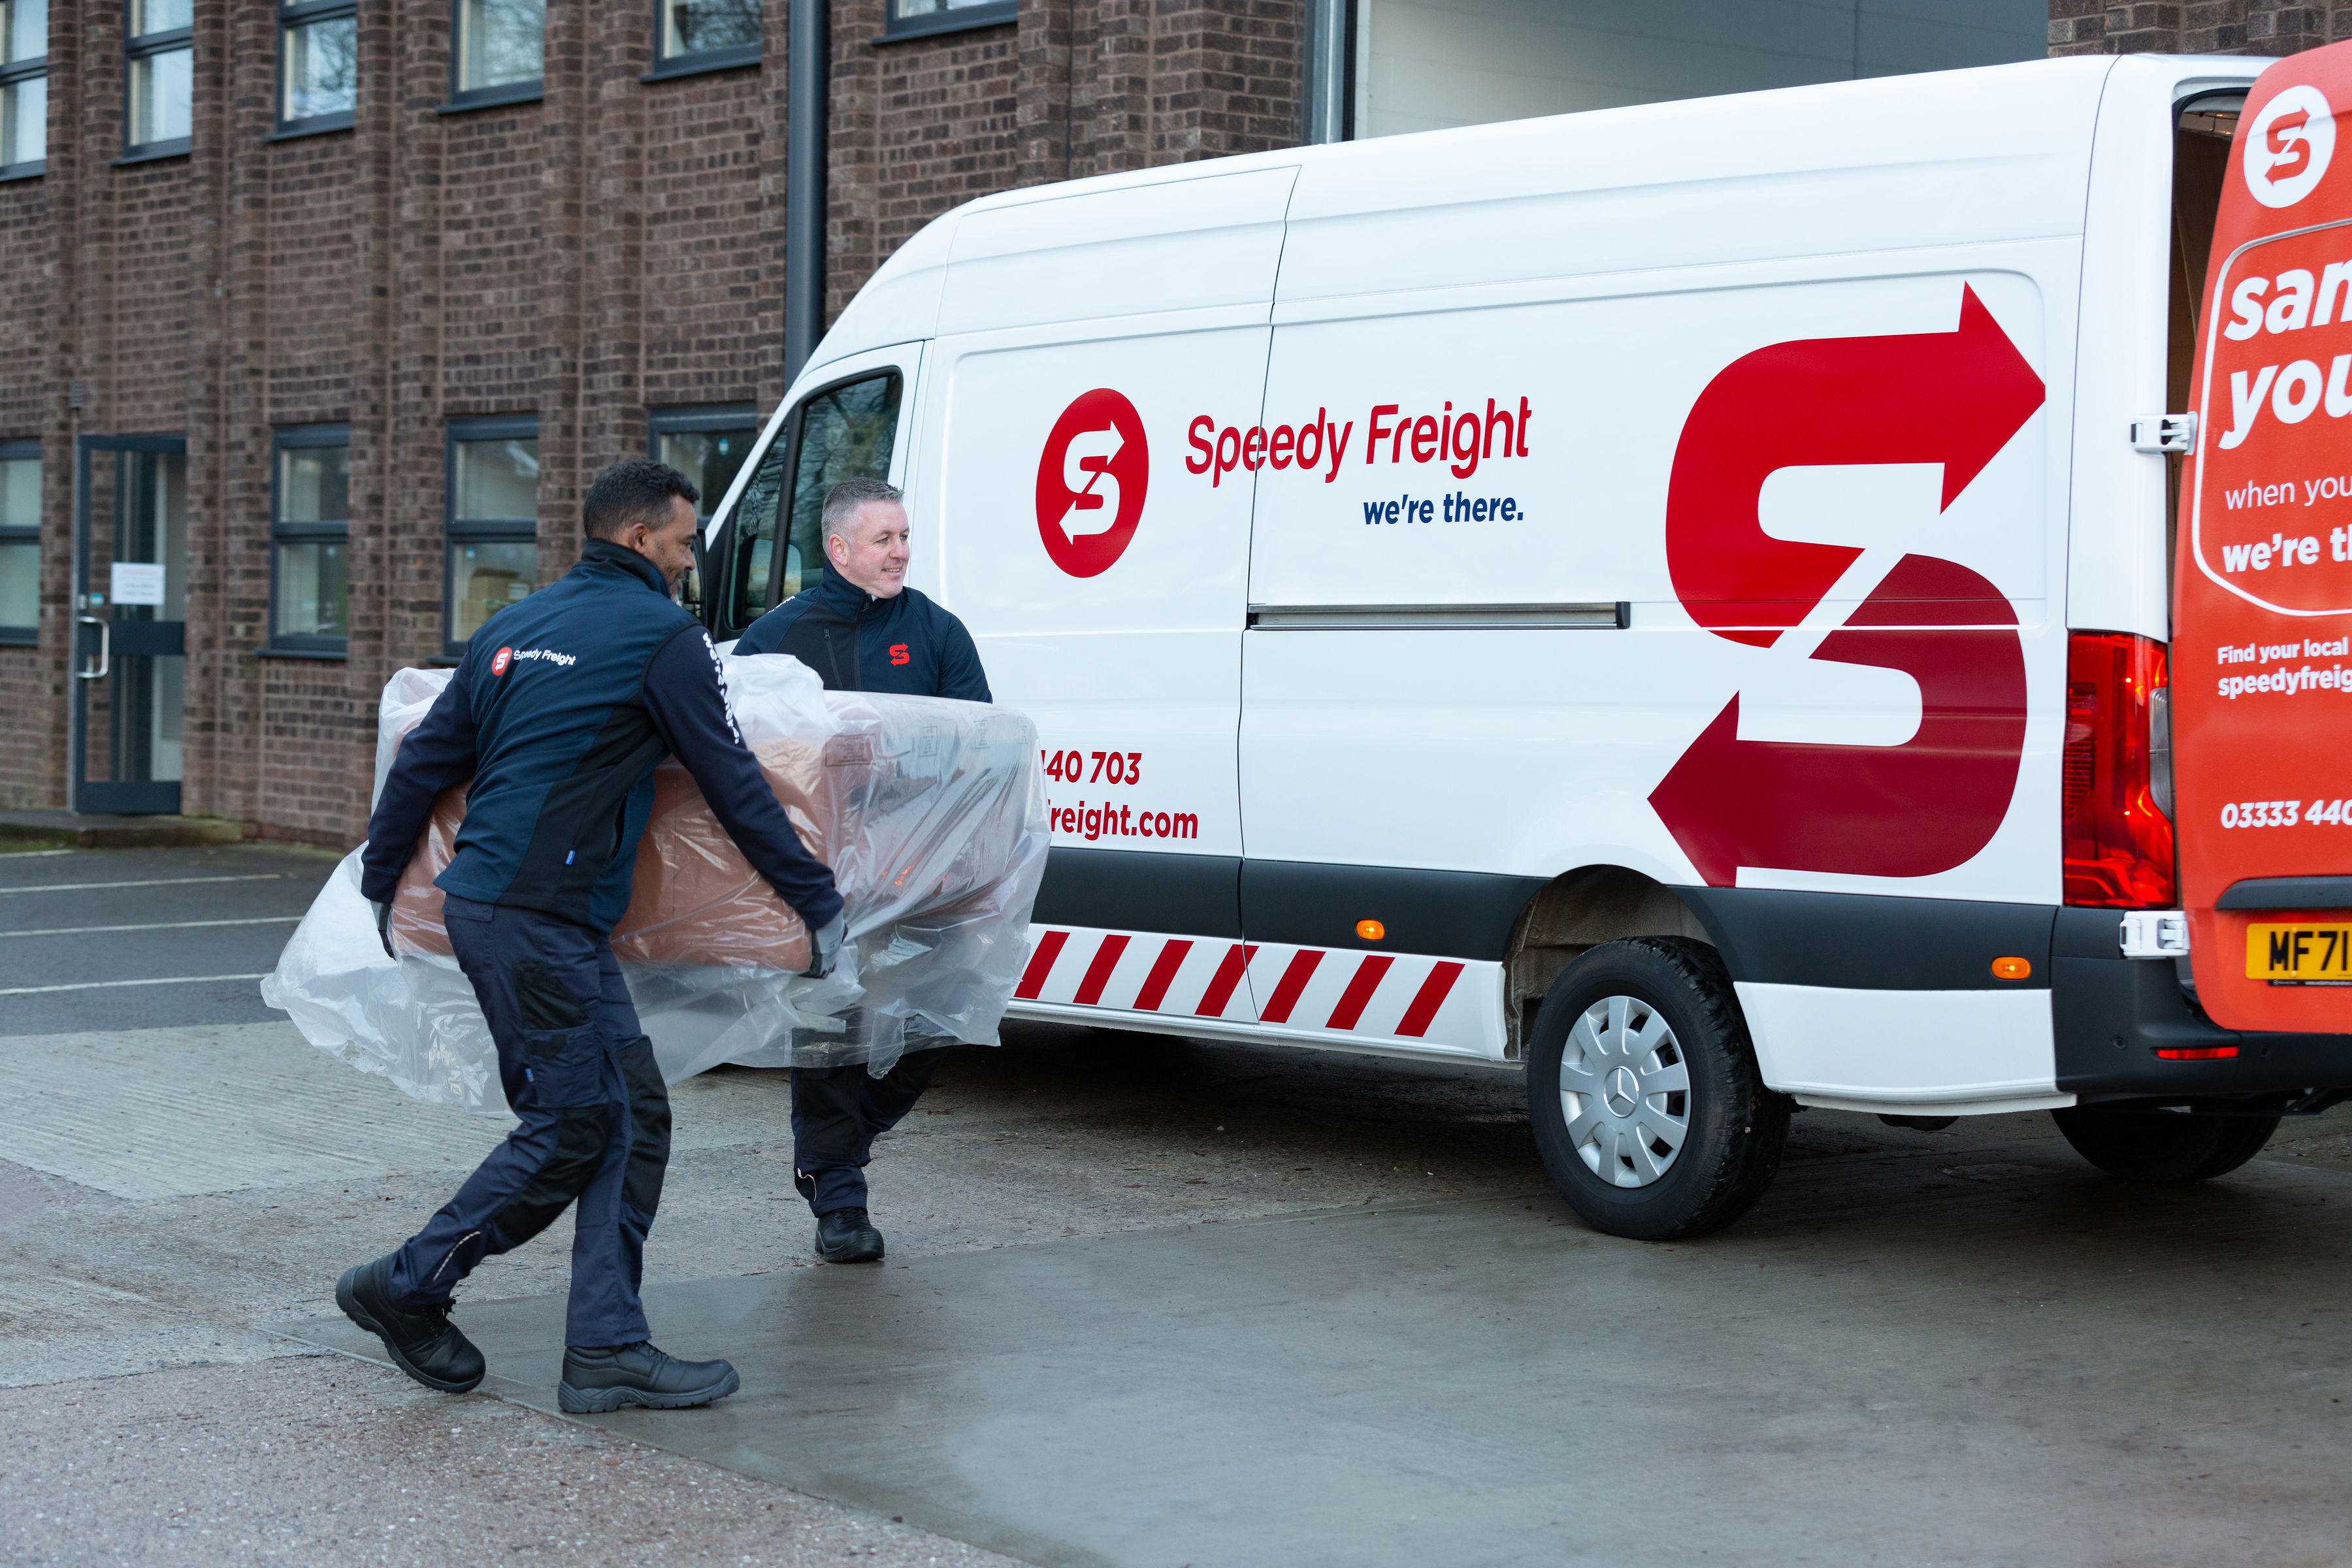 Images Speedy Freight Stockport